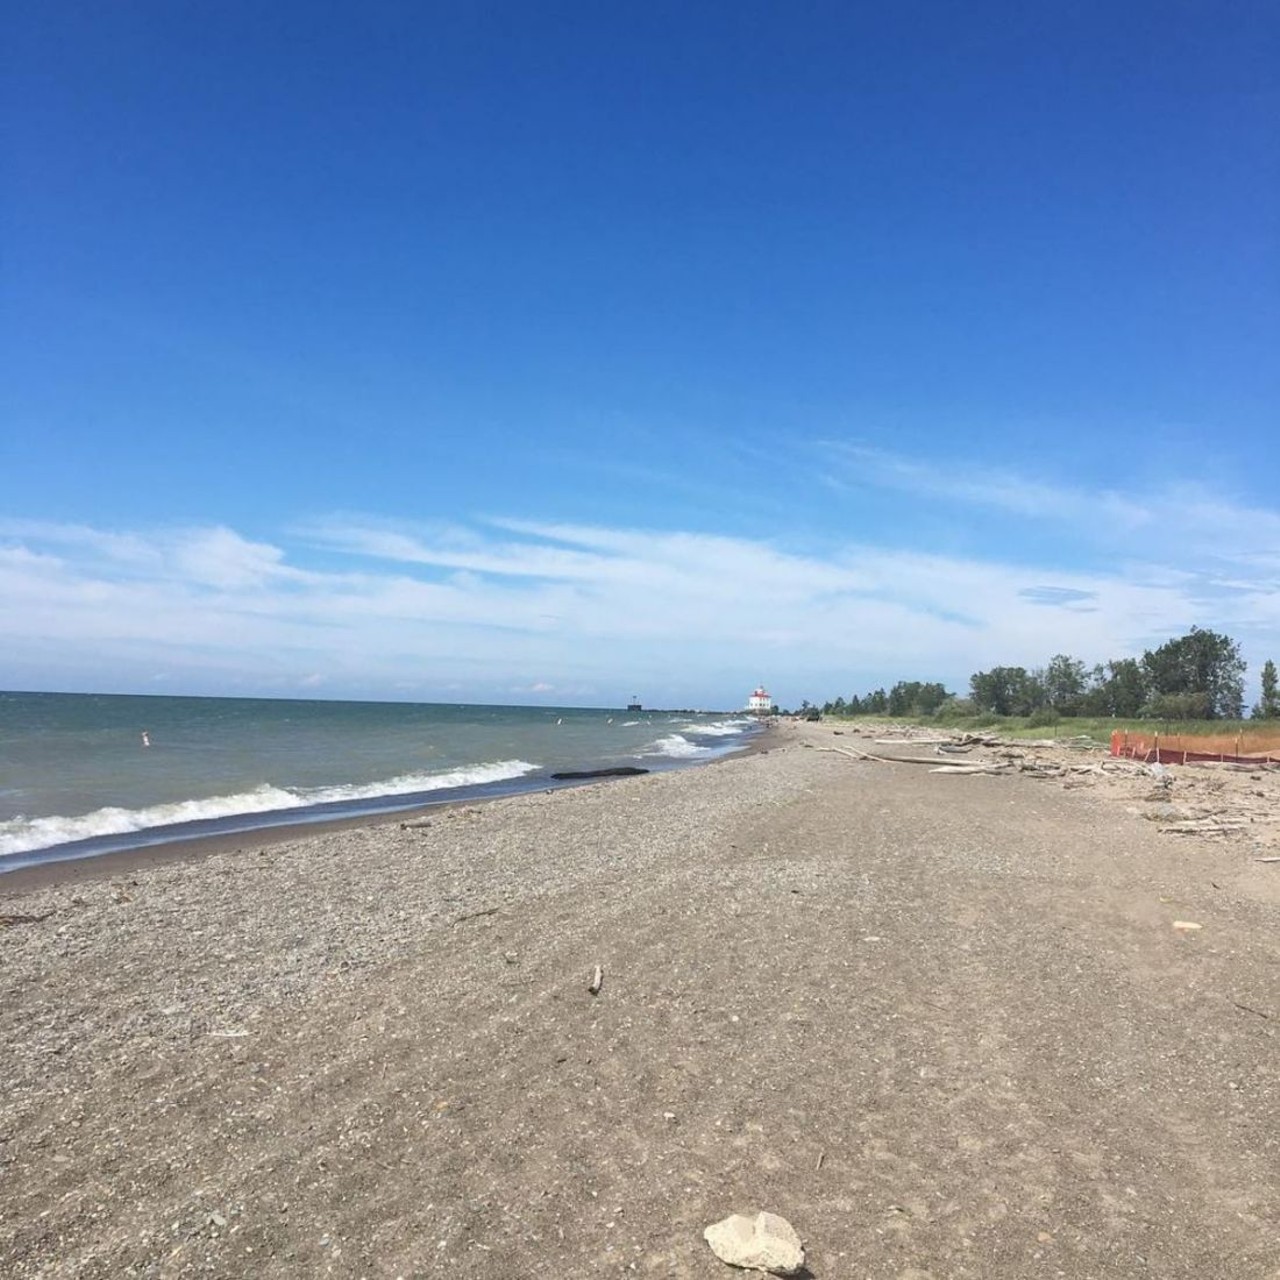 Take a trip to the beach
Headlands Beach State Park pictured above
Northeast Ohio some great beach destinations besides Edgewater. Make the drive to Mentor and spend an afternoon at Headlands Beach State Park, which feels like a legit remote beach. Other amazing beach spots can be found here.
Photo via  dawn_d_s/Instagram